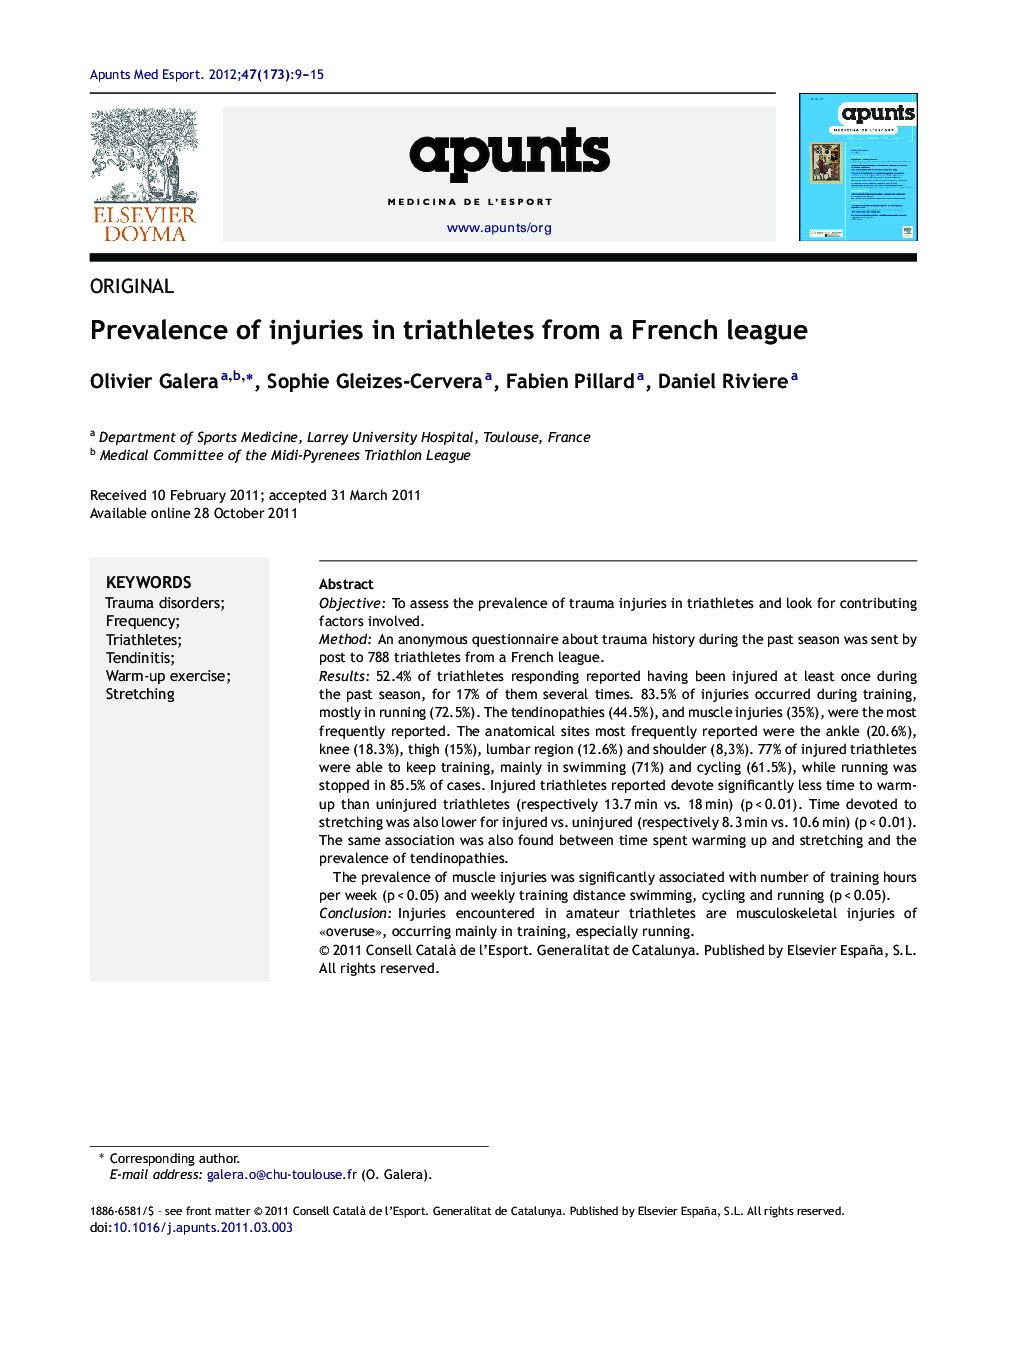 Prevalence of injuries in triathletes from a French league